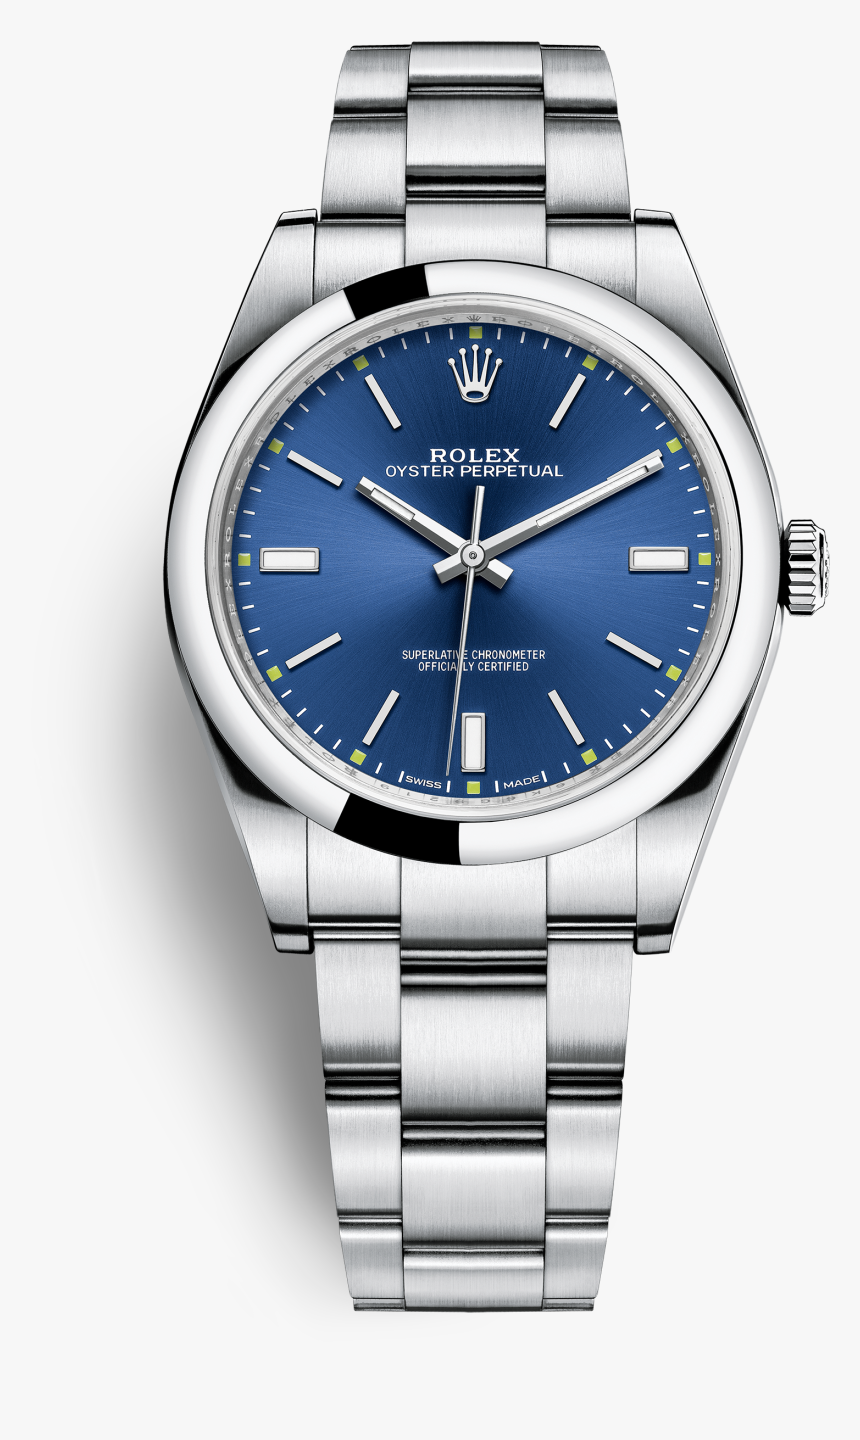 Oyster-perpetual - Rolex Oyster Perpetual Black Dial, HD Png Download, Free Download